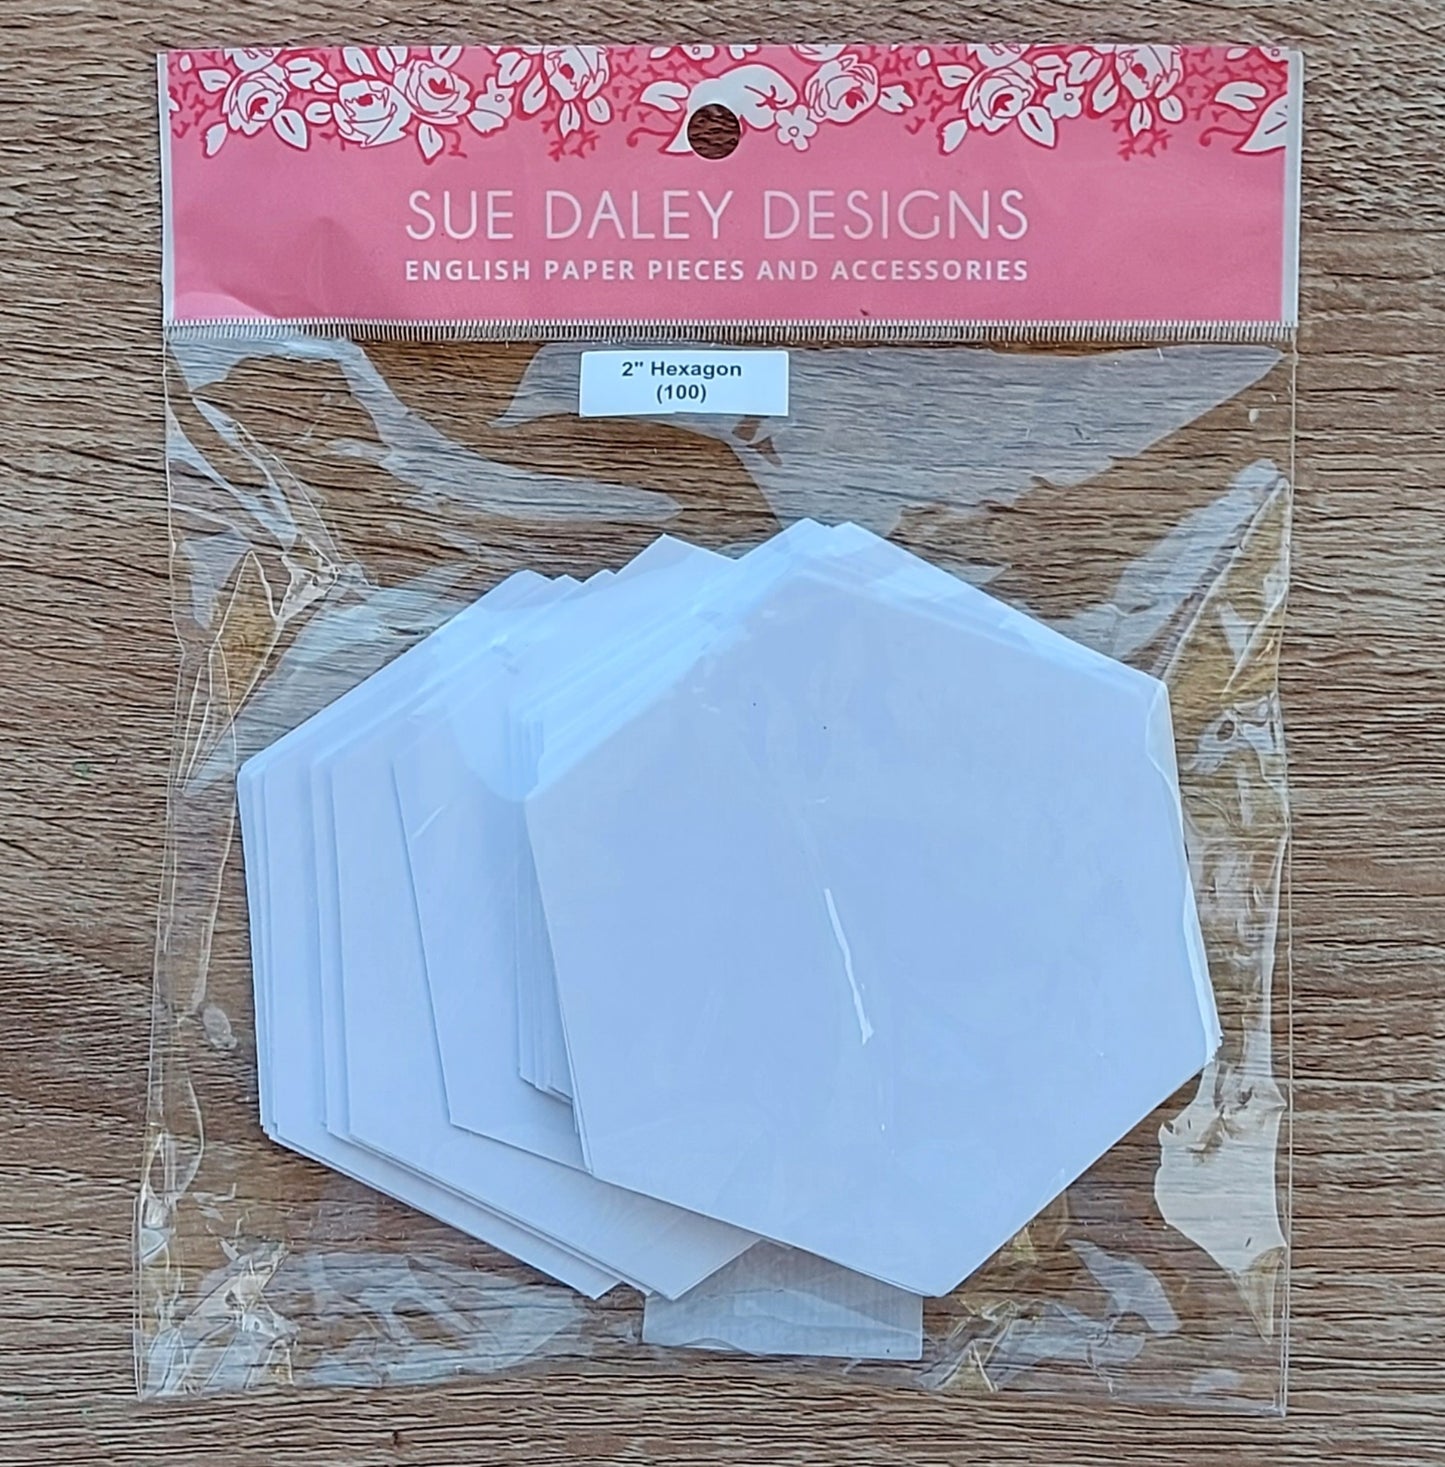 Hexagons 2 inch papers for EPP English Paper Piecing Sue Daley Designs